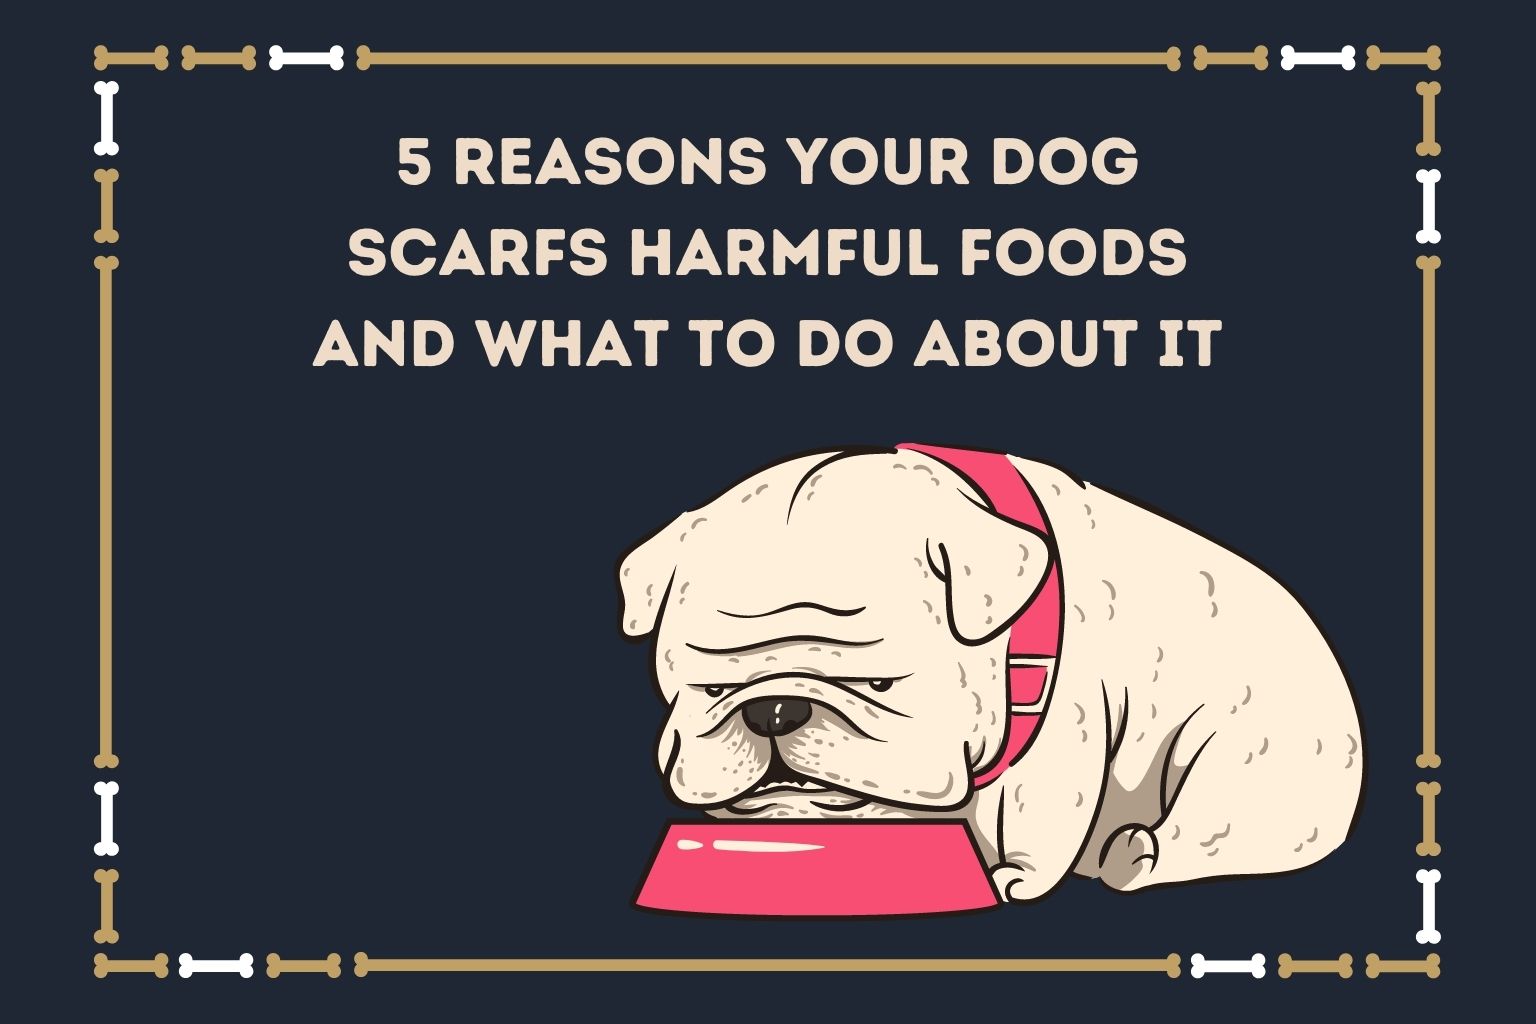 5 Reasons Your Dog Scarfs Harmful Foods and What to Do About It